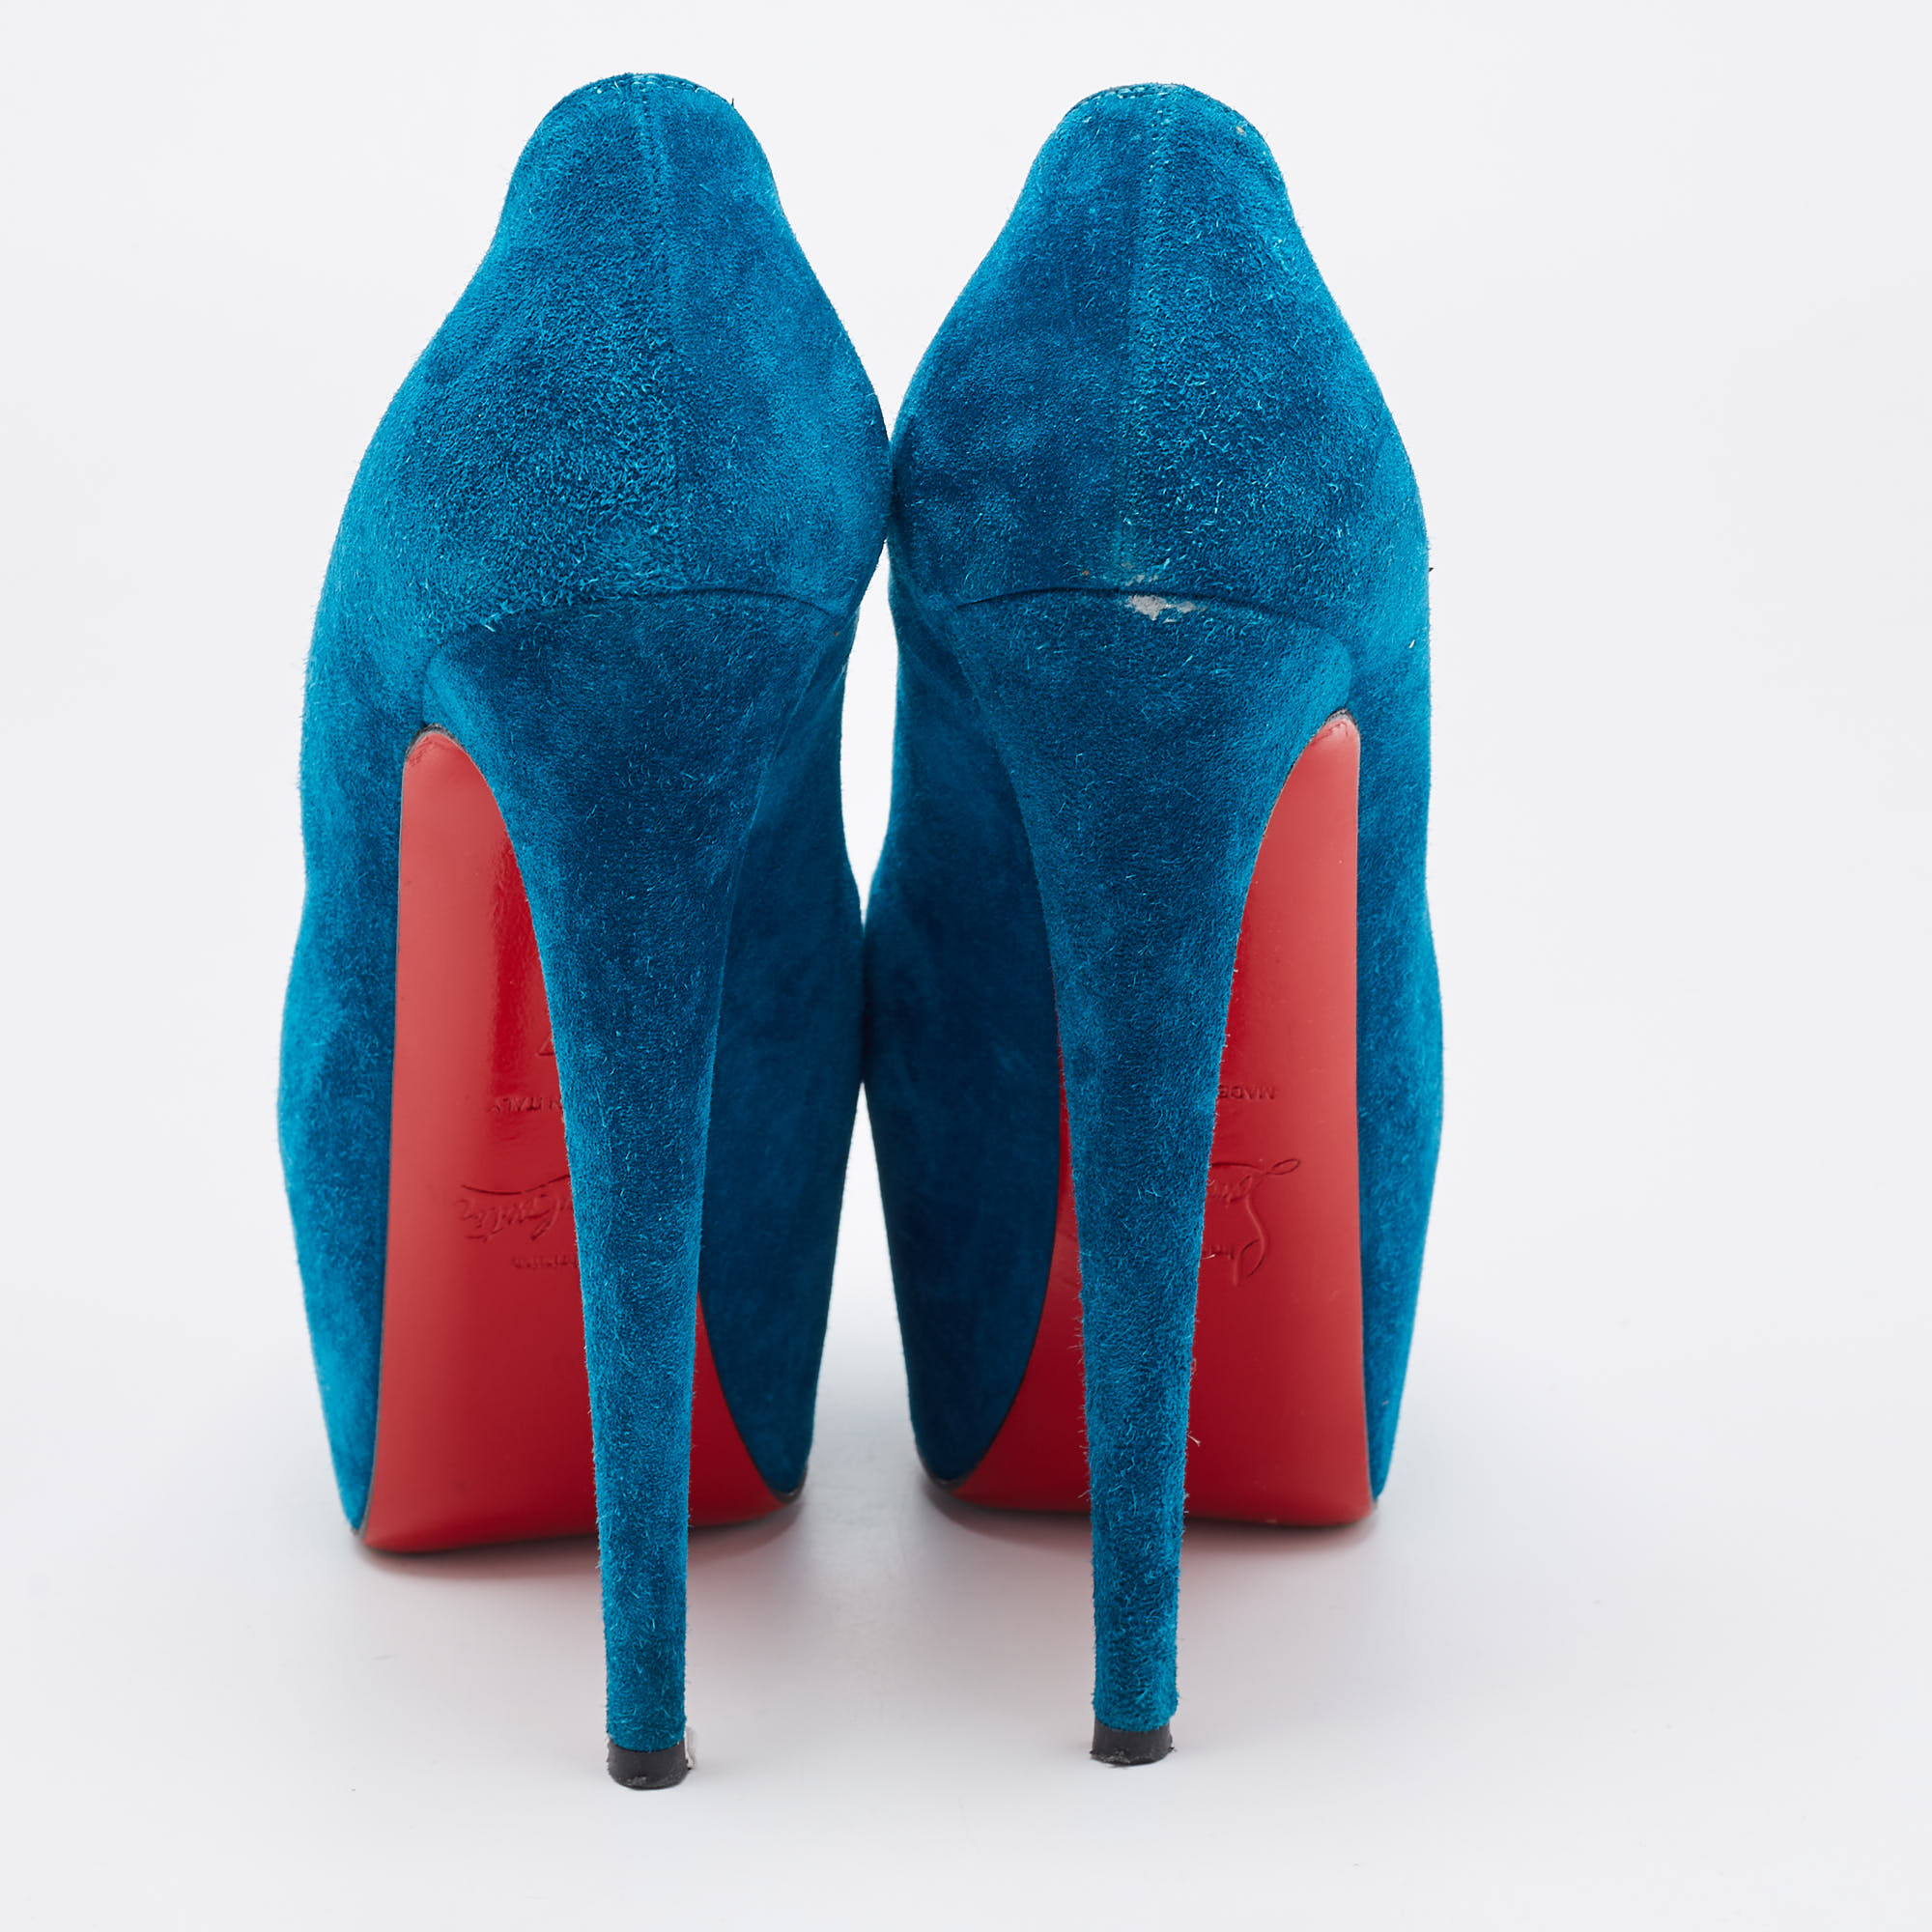 Christian Louboutin Blue Suede Daffodile Pumps Size 37